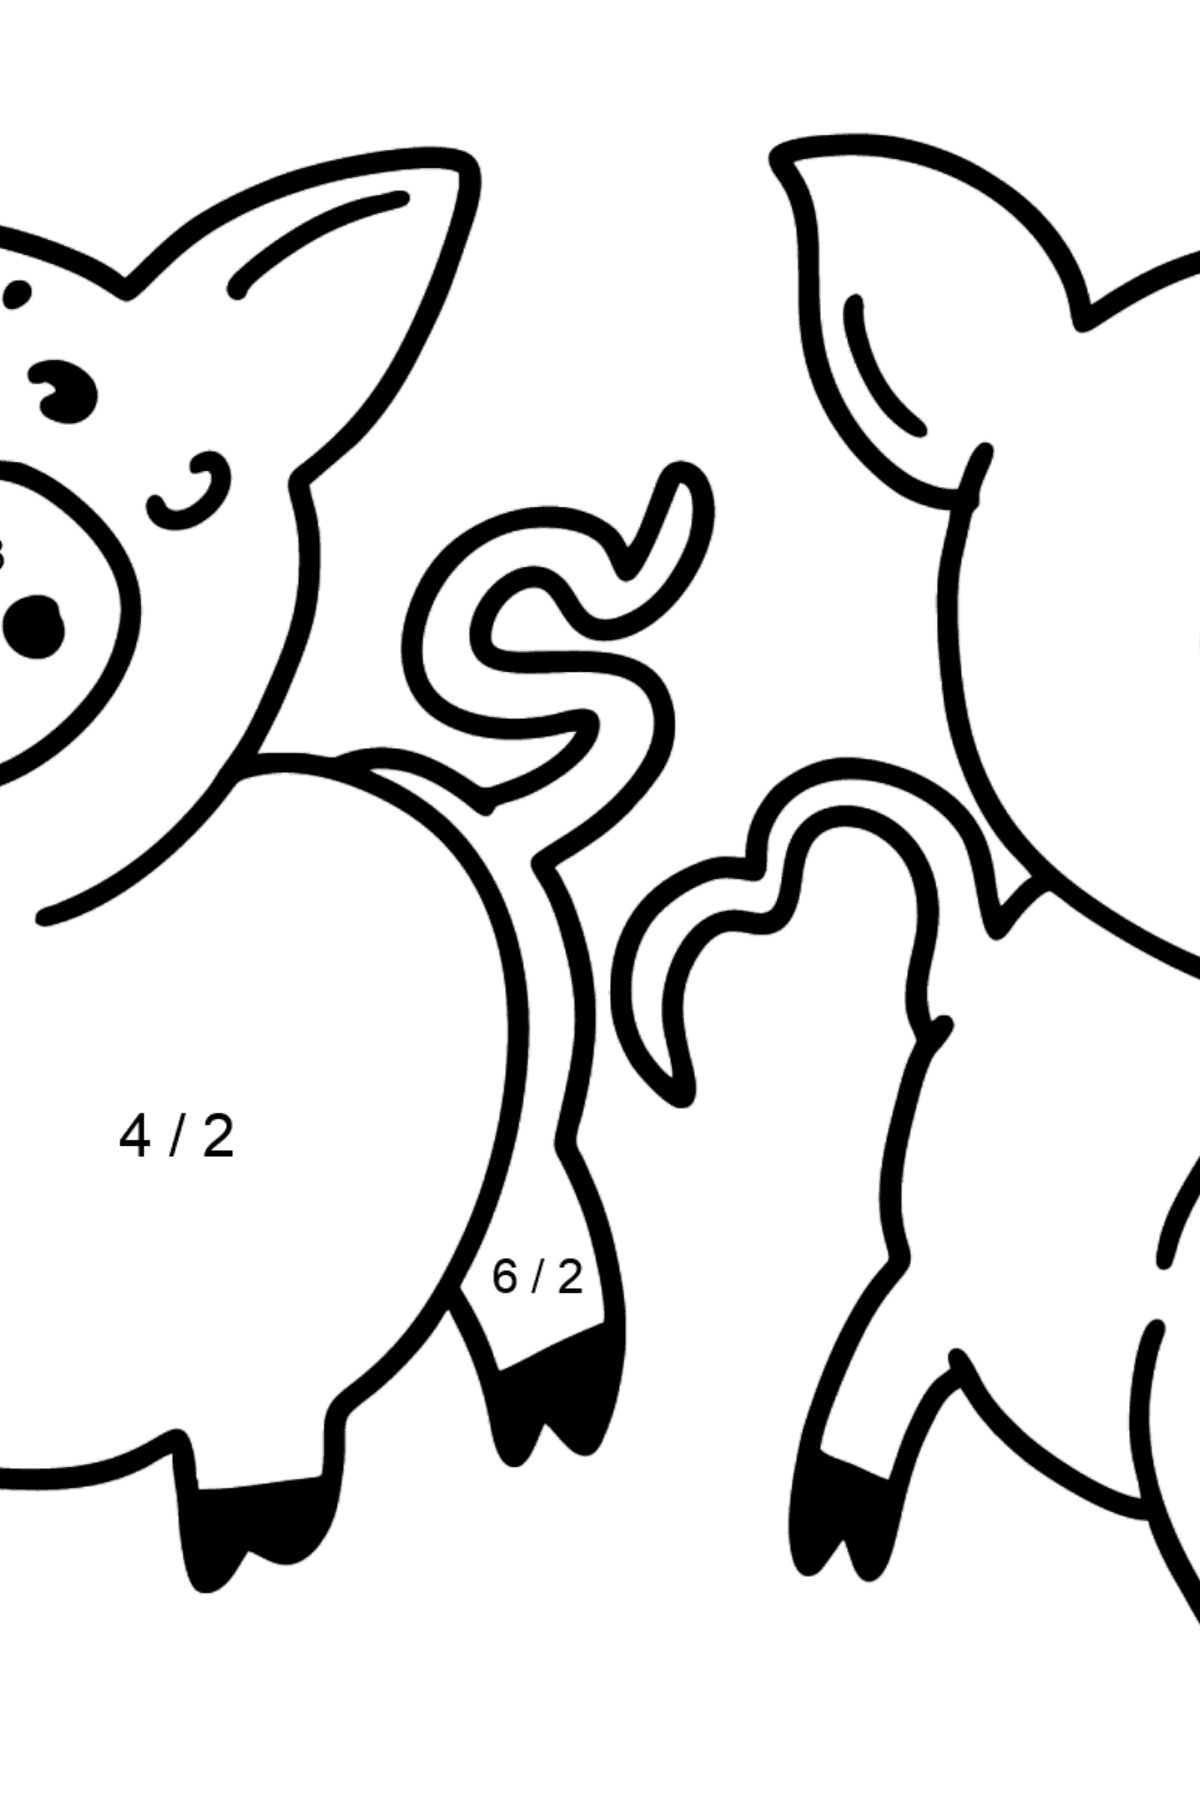 Piglets coloring page - Math Coloring - Division for Kids